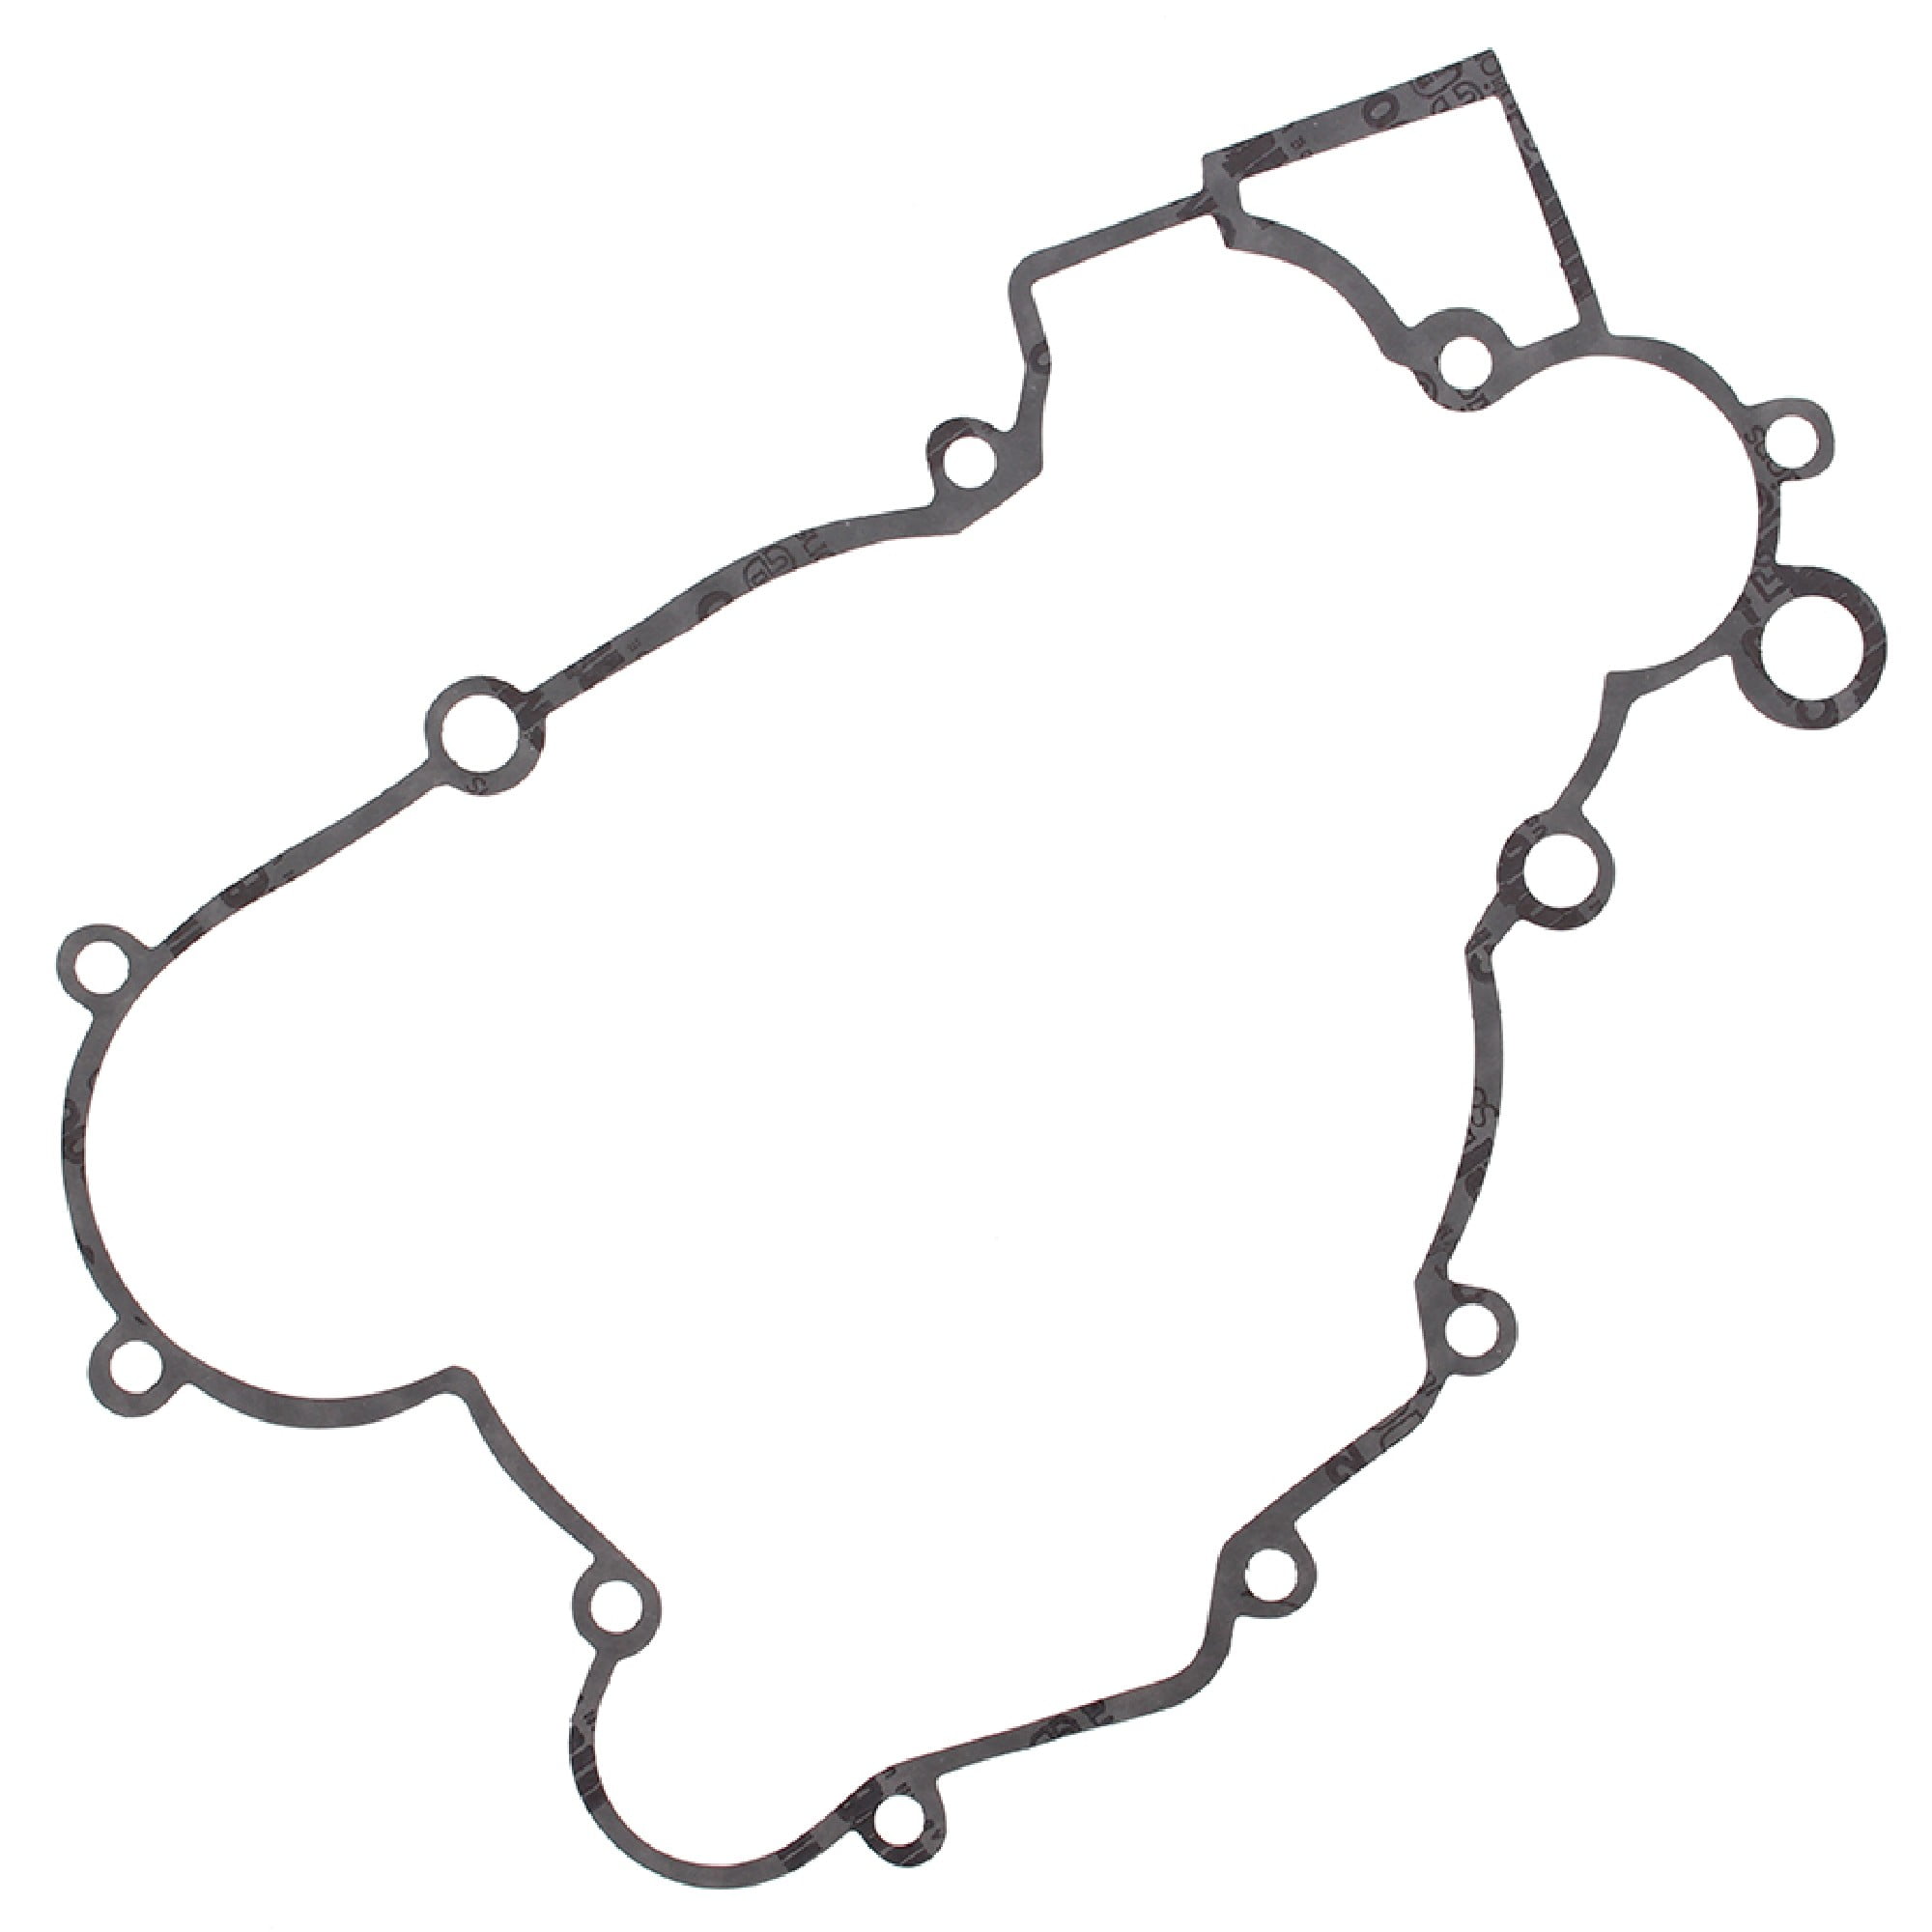 Exhaust Gasket Kit For KTM SX 85 2013-2017